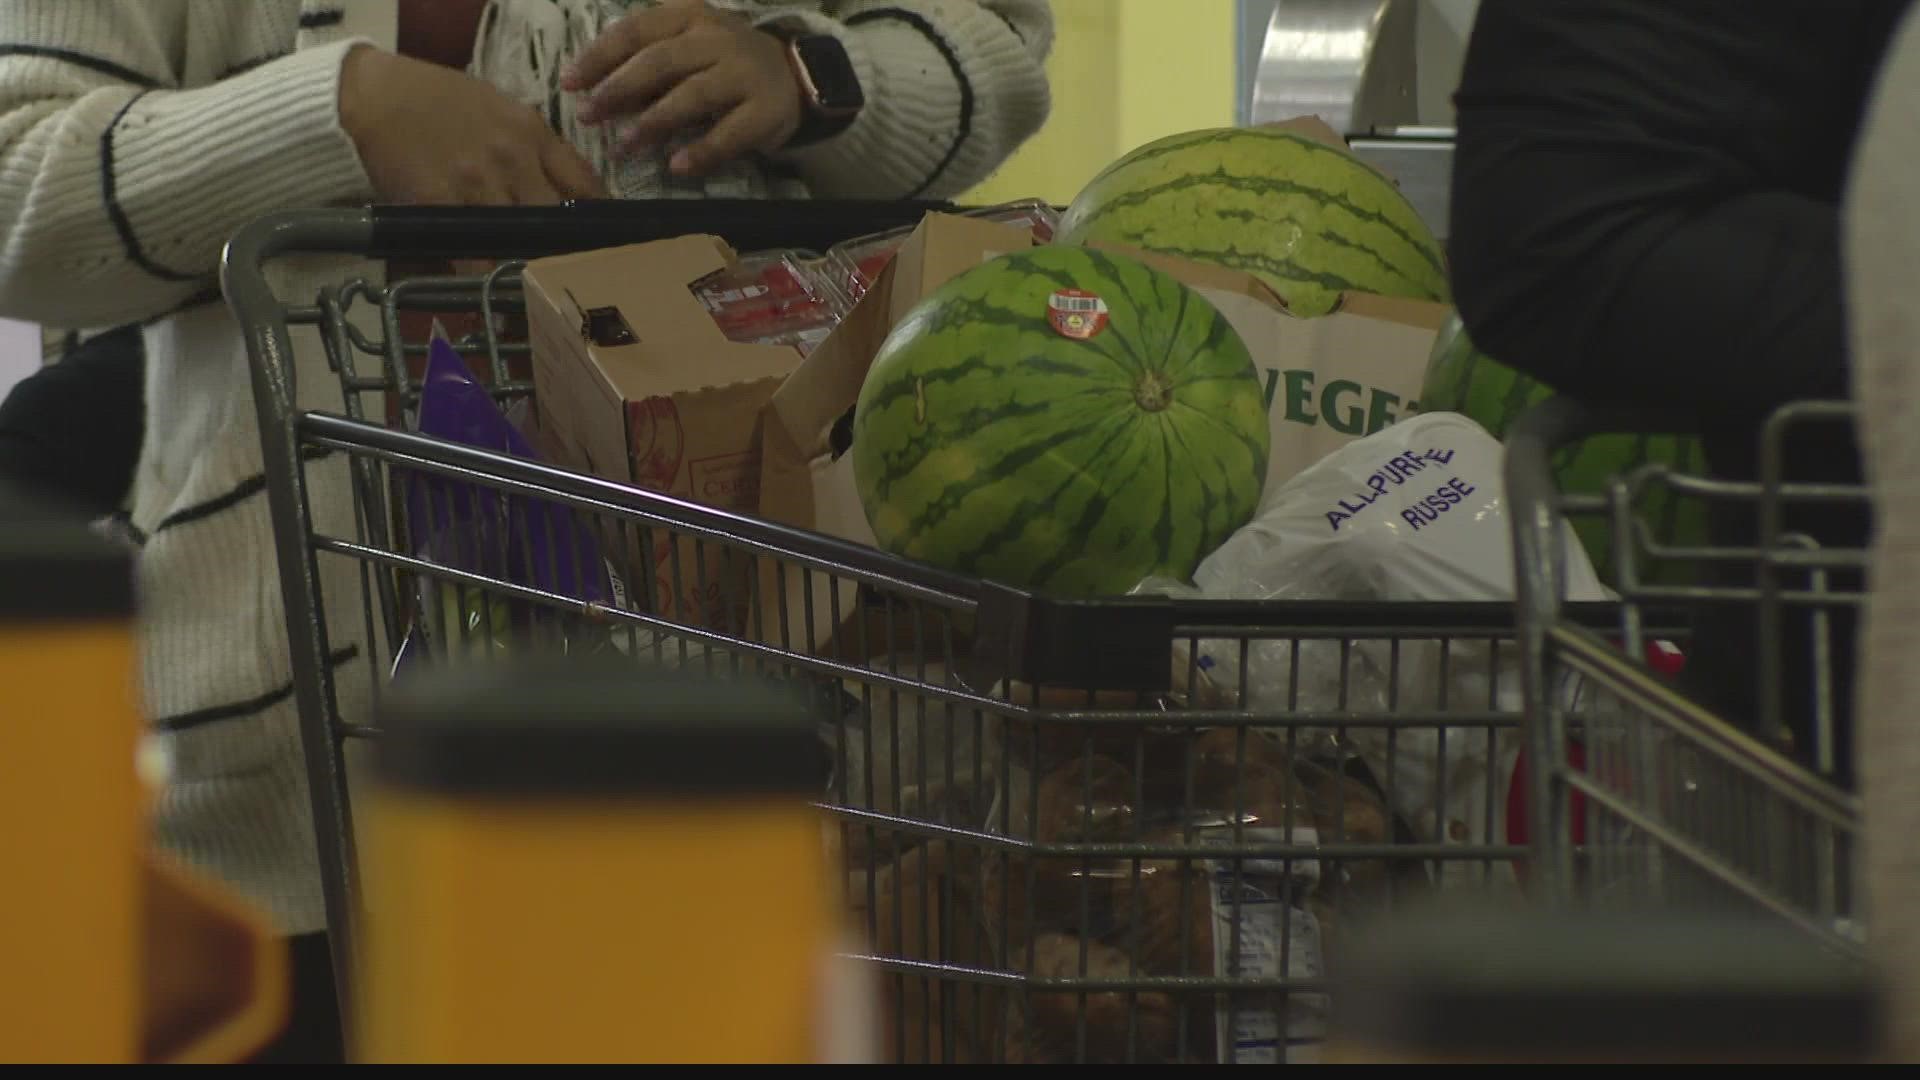 The leader of a local food bank says discontinuing the program couldn't come at a worse time for many Hoosiers.